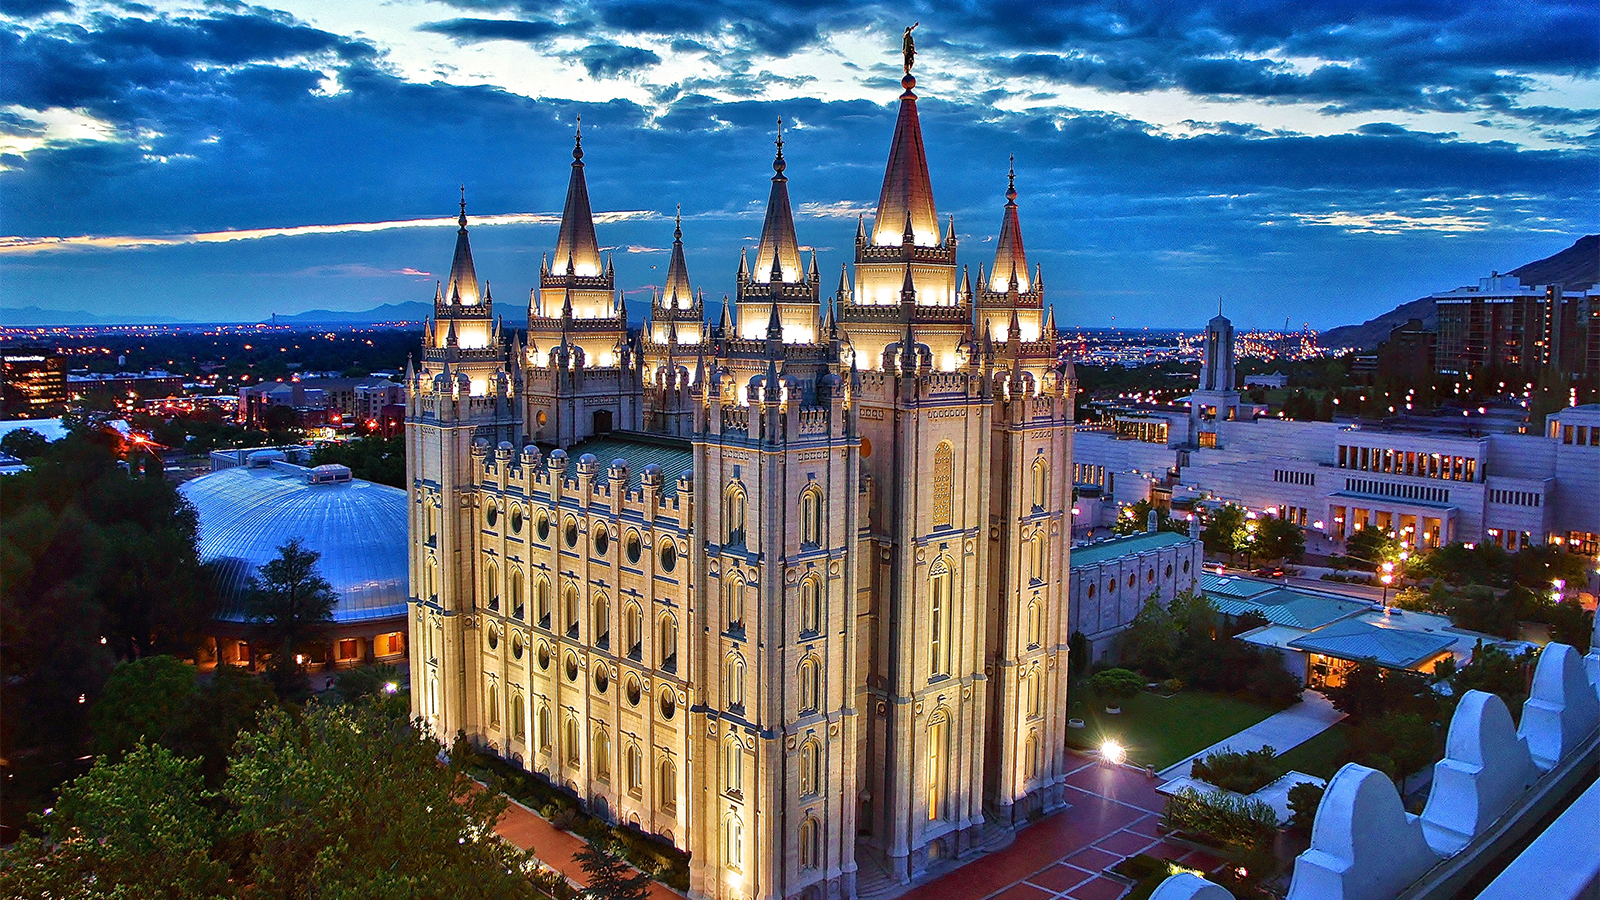 New LDS domain name may spark brand war over 'Church of Jesus Christ'